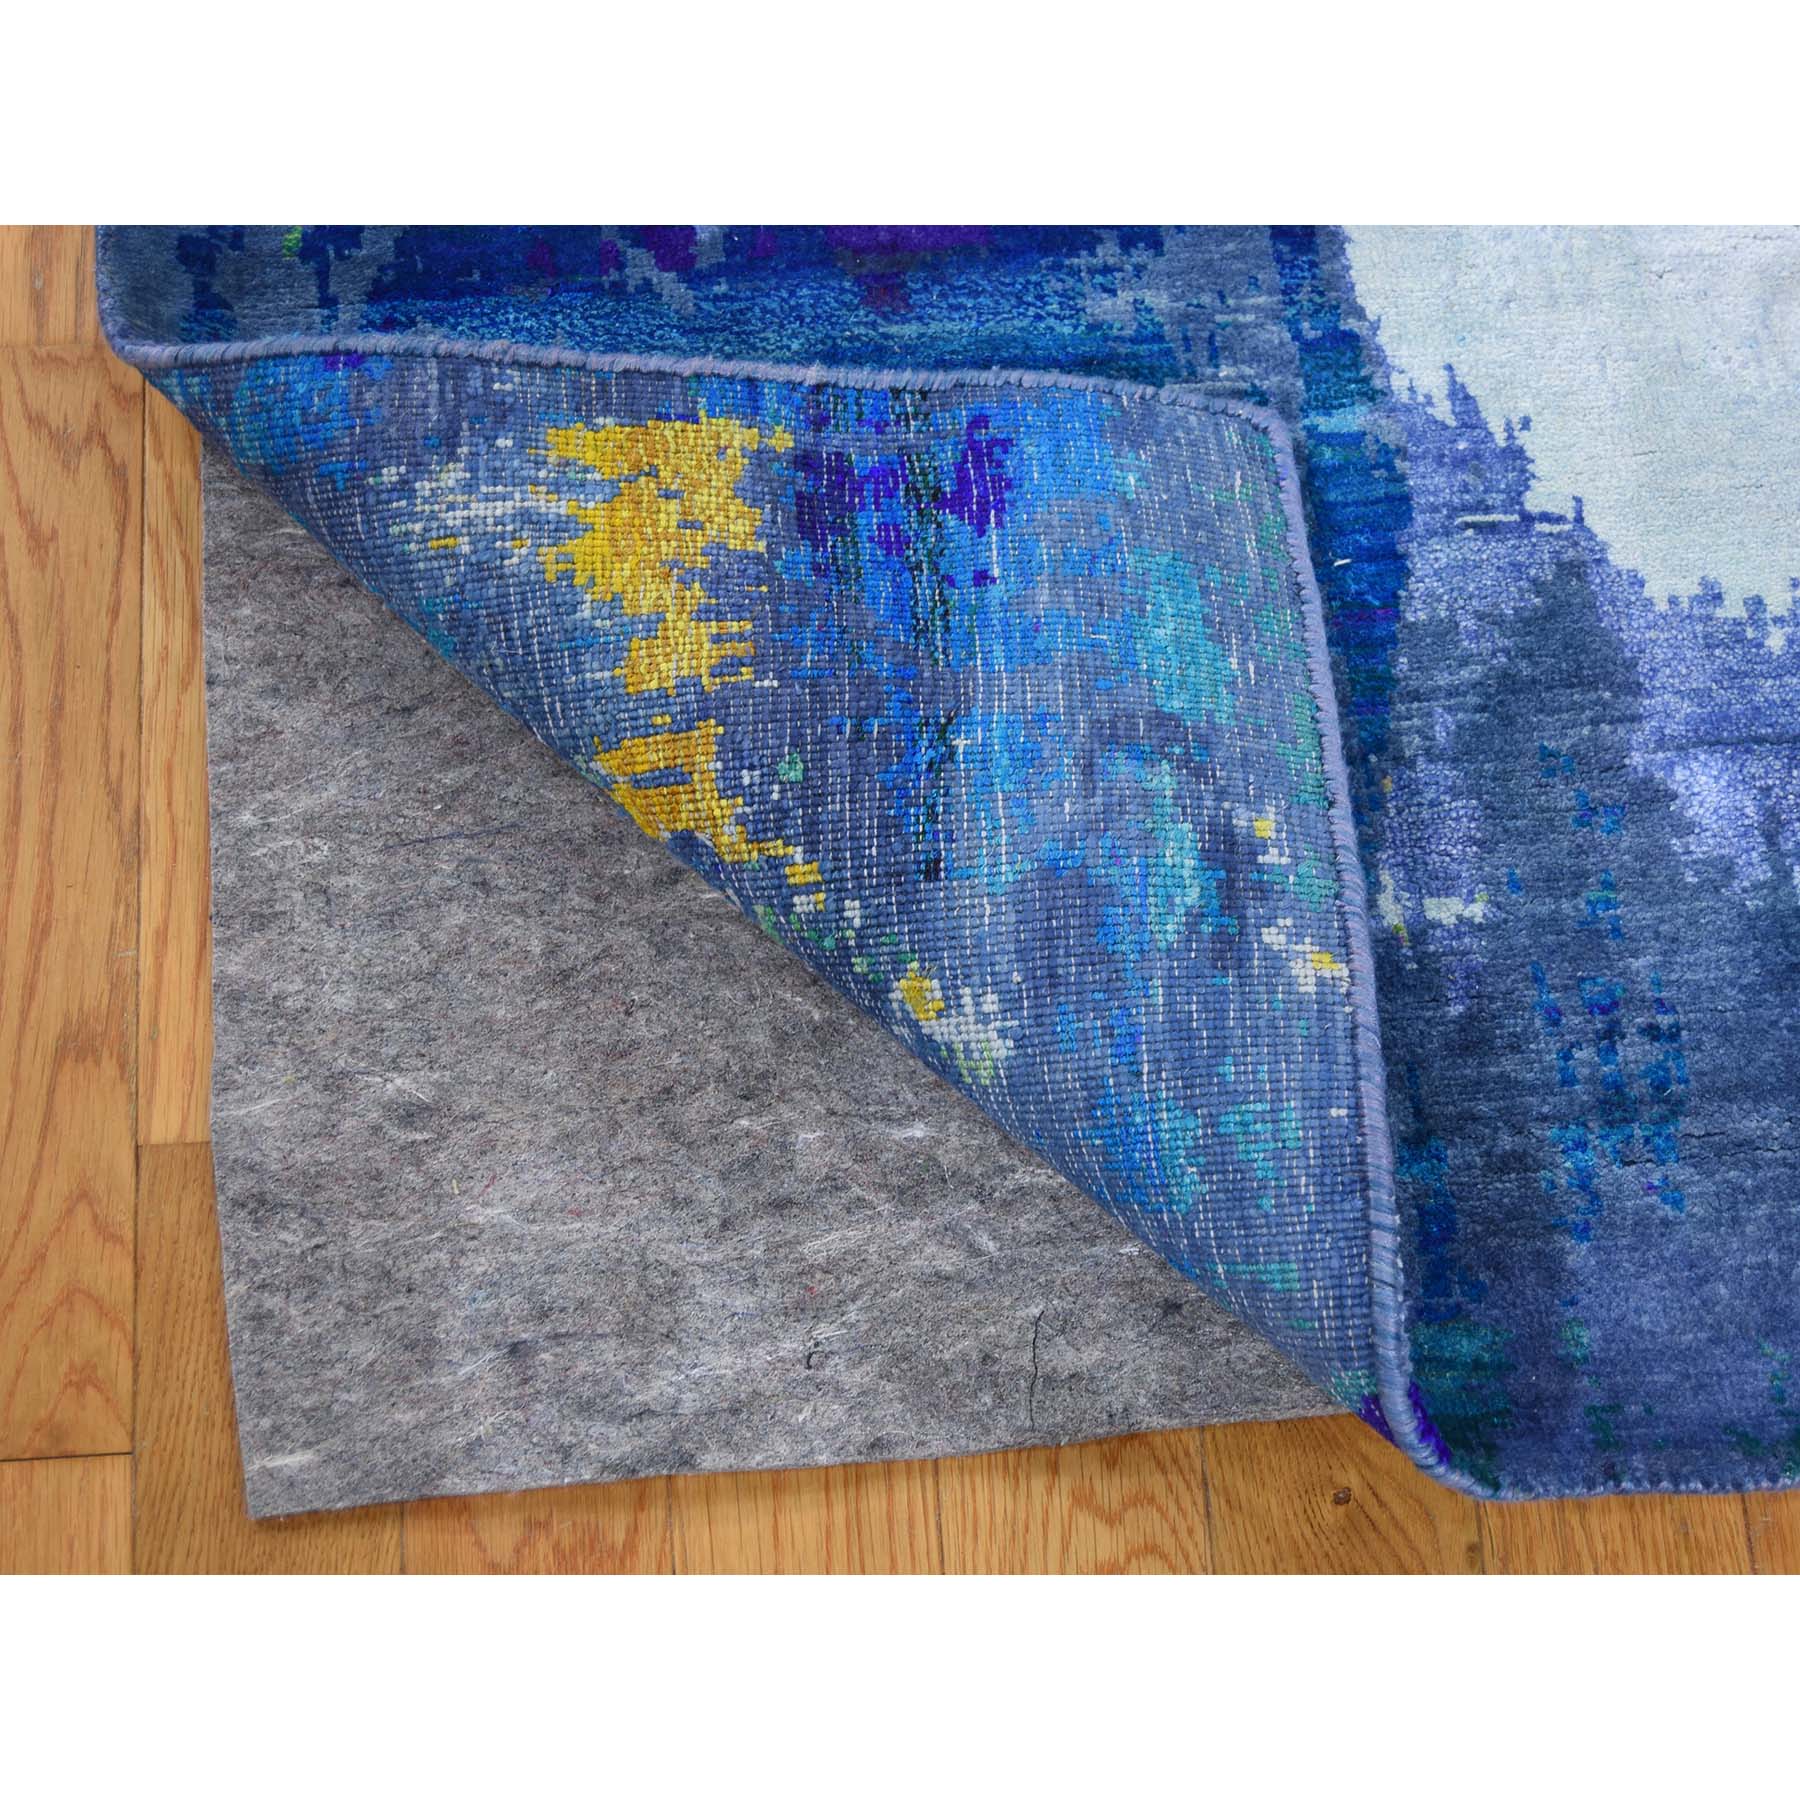 5-x7- Pure Sari Silk Abstract Design Hand-Knotted Oriental Rug 